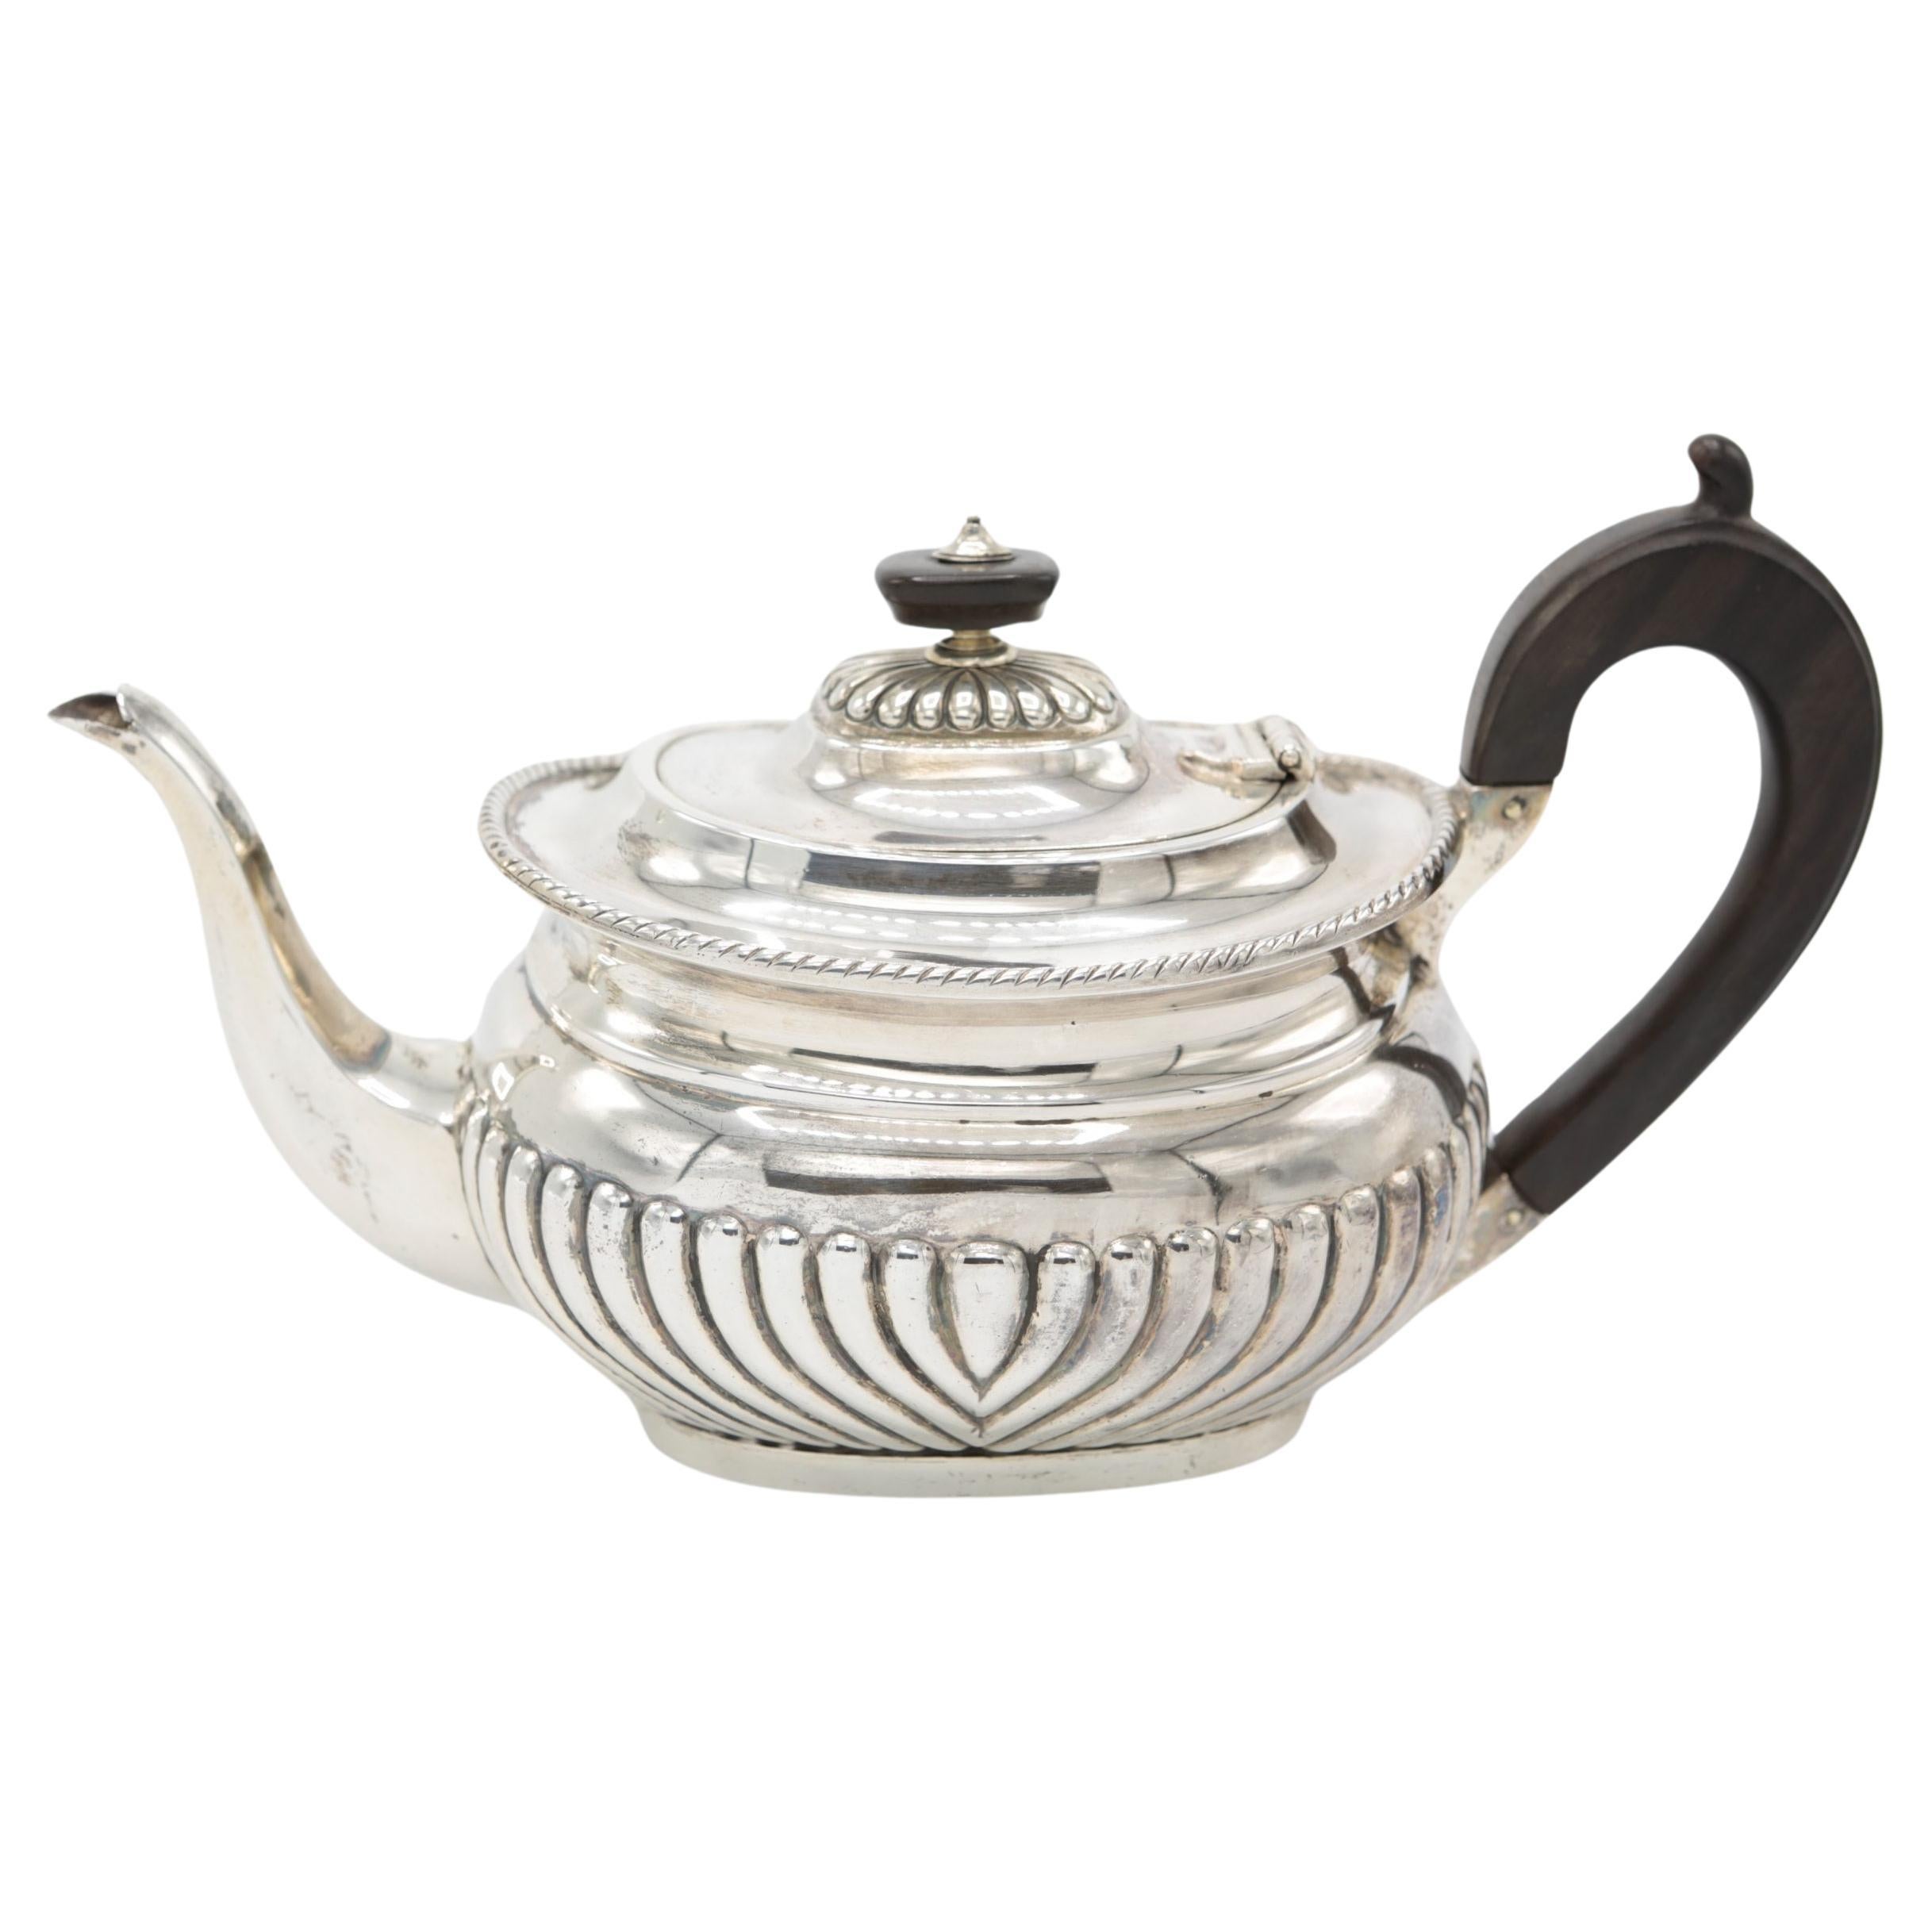 19th Century Queen Anne style Teapot, 925/- sterling silver, London